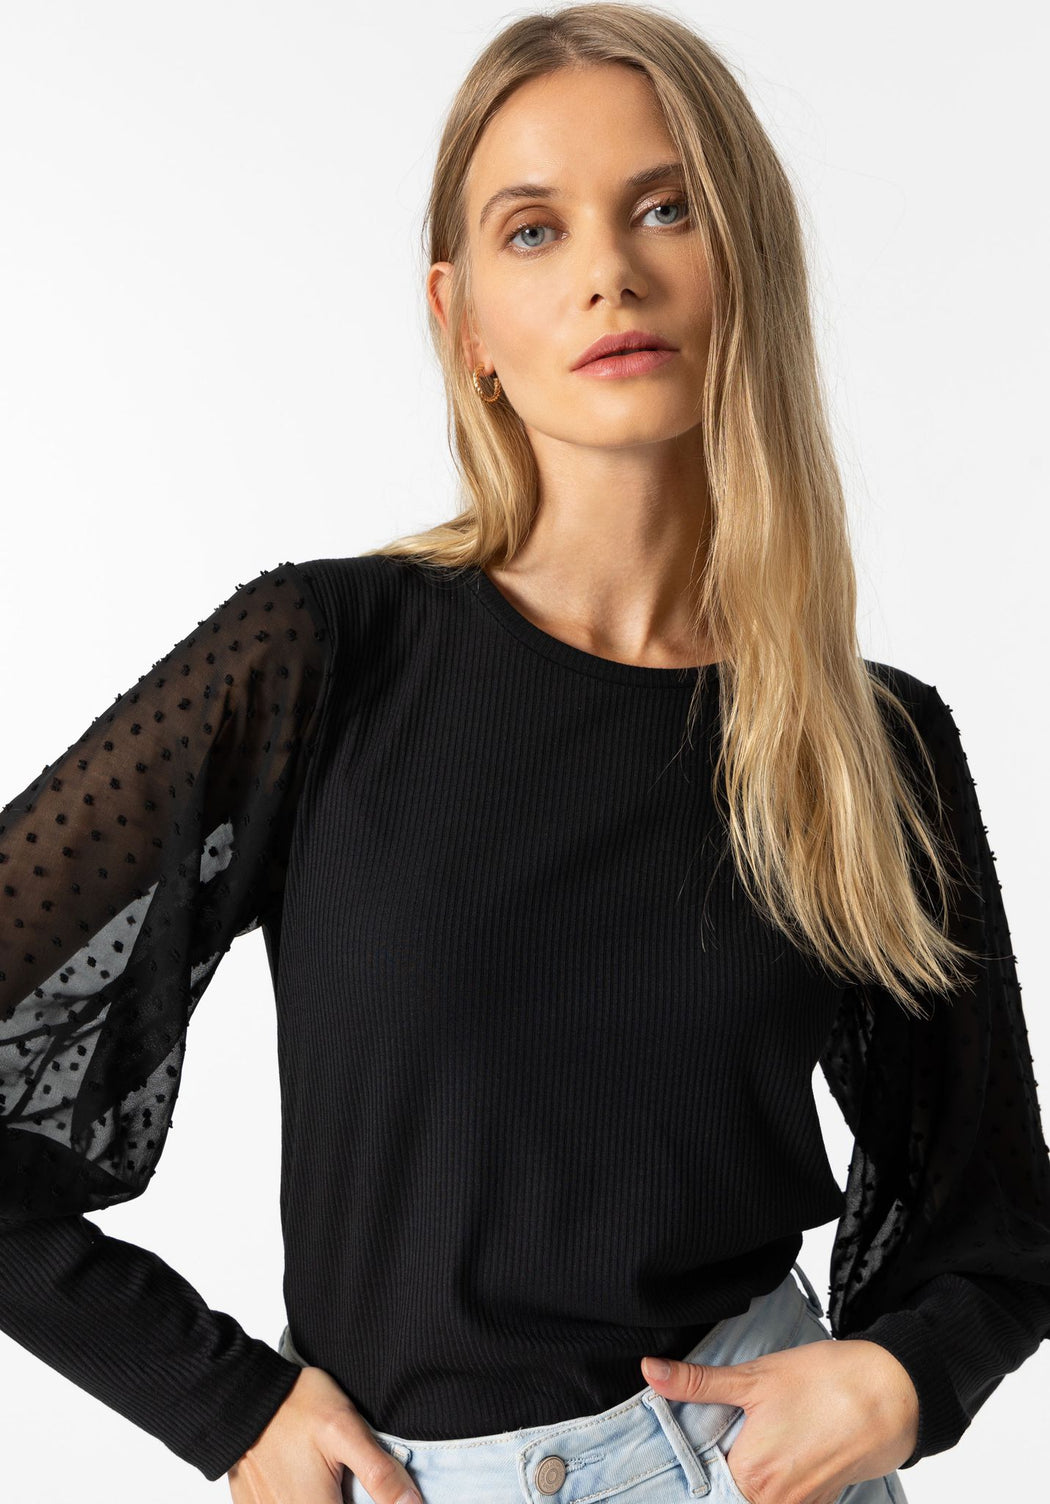 Chicago black mesh sleeve knit top